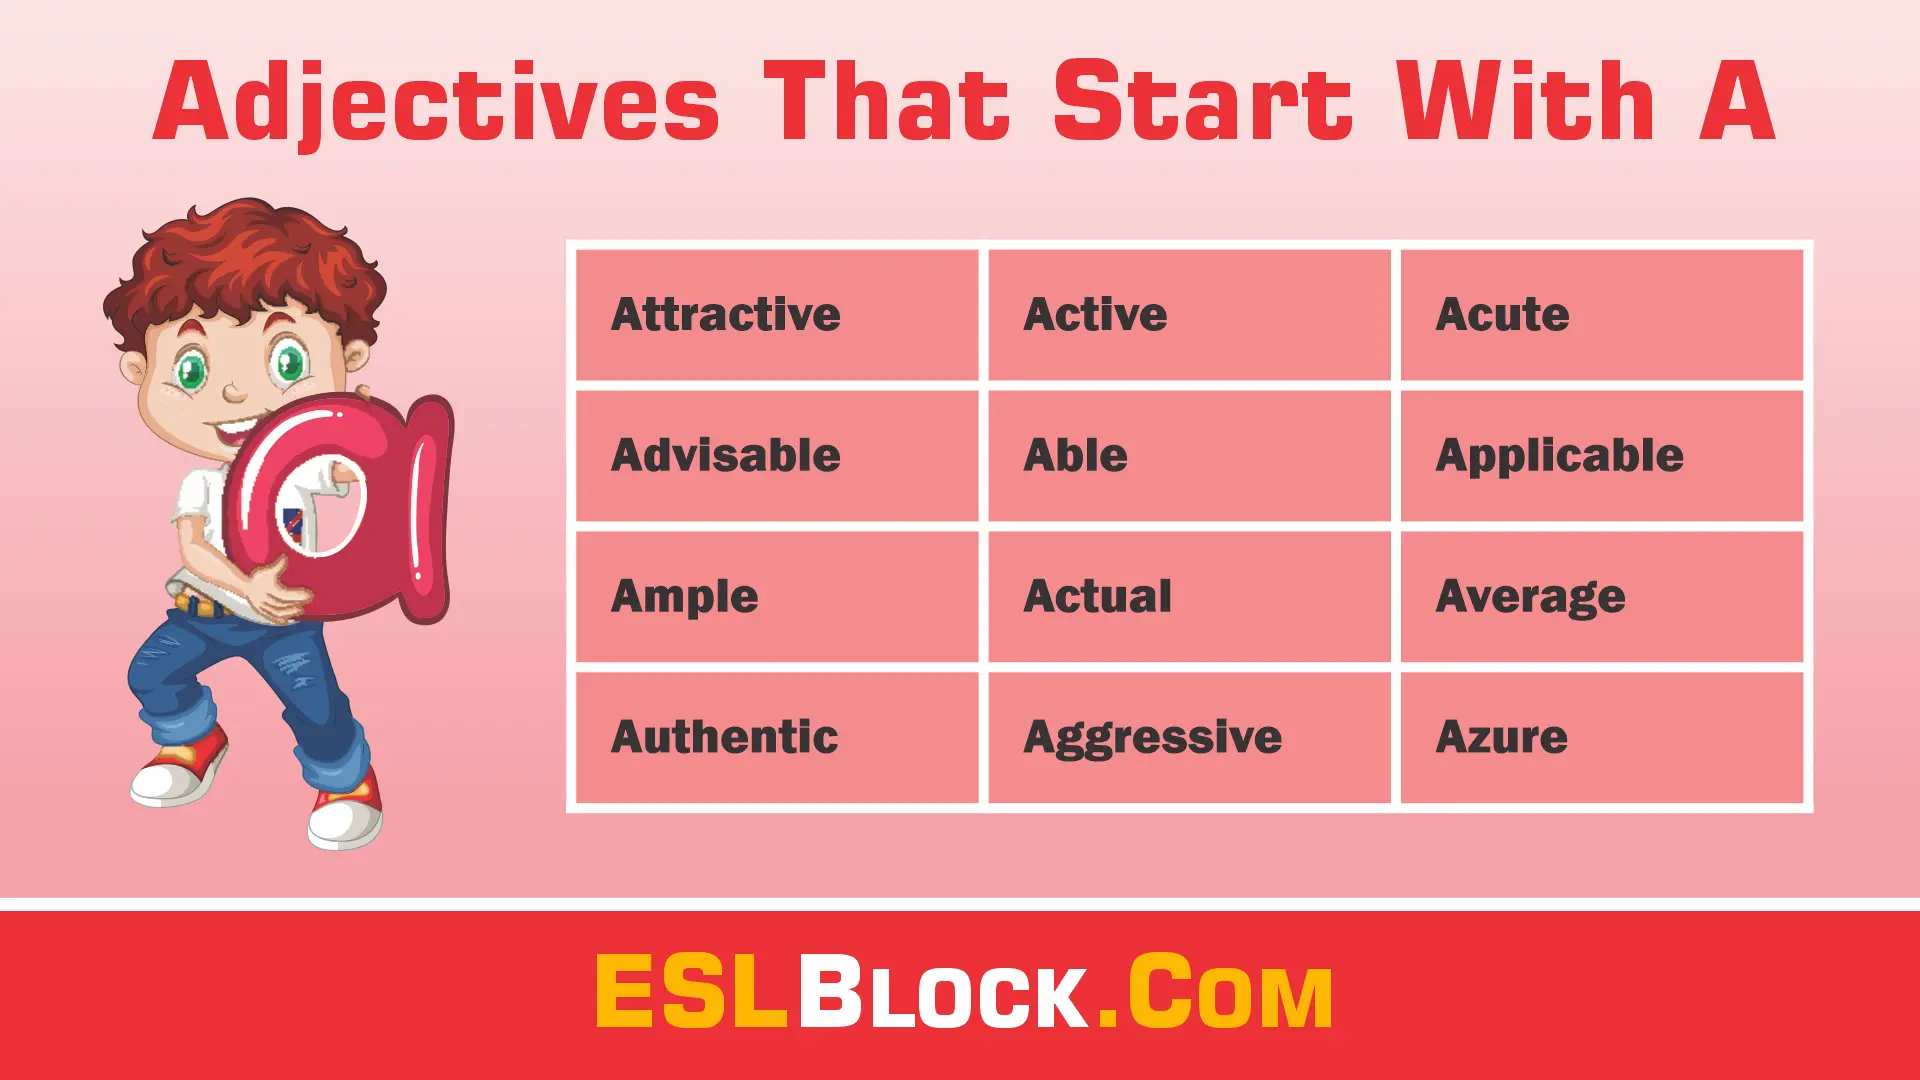 A-Z Adjectives, Adjective Words, Adjectives, Vocabulary, Words That Describe a Person